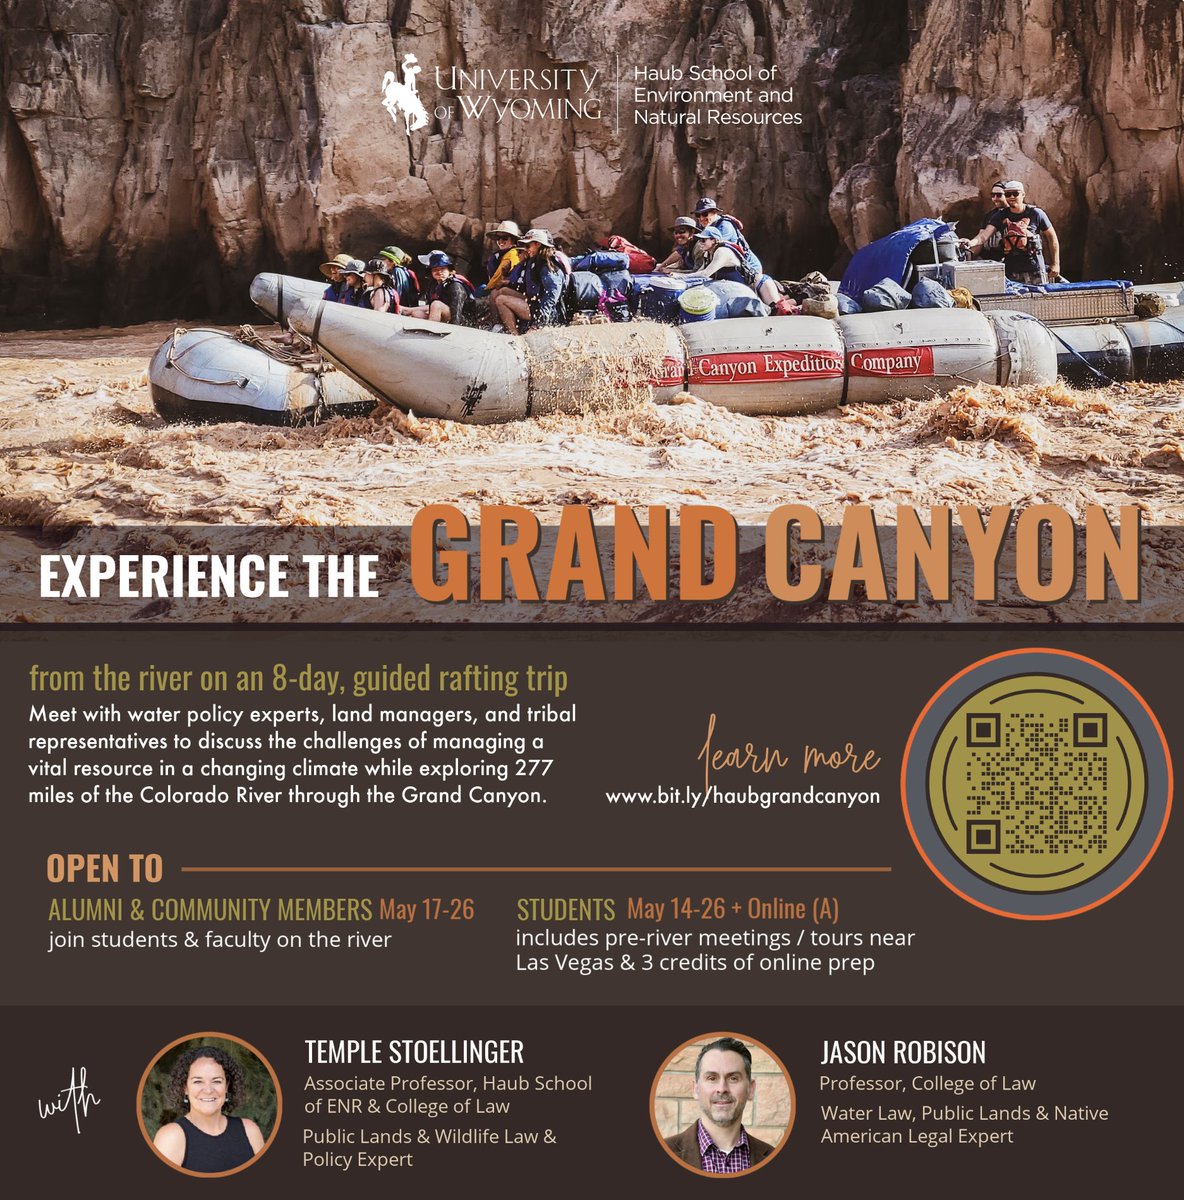 Join Prof. Stoellinger and Prof. Robison for Canyonlands: Climate, Water & Culture, a field experience on the Colorado River this May. Students, alumni, and community members welcome! #uwyolaw #universityofwyoming #uwcollegeoflaw #experientiallearning @UW_Ruckelshaus